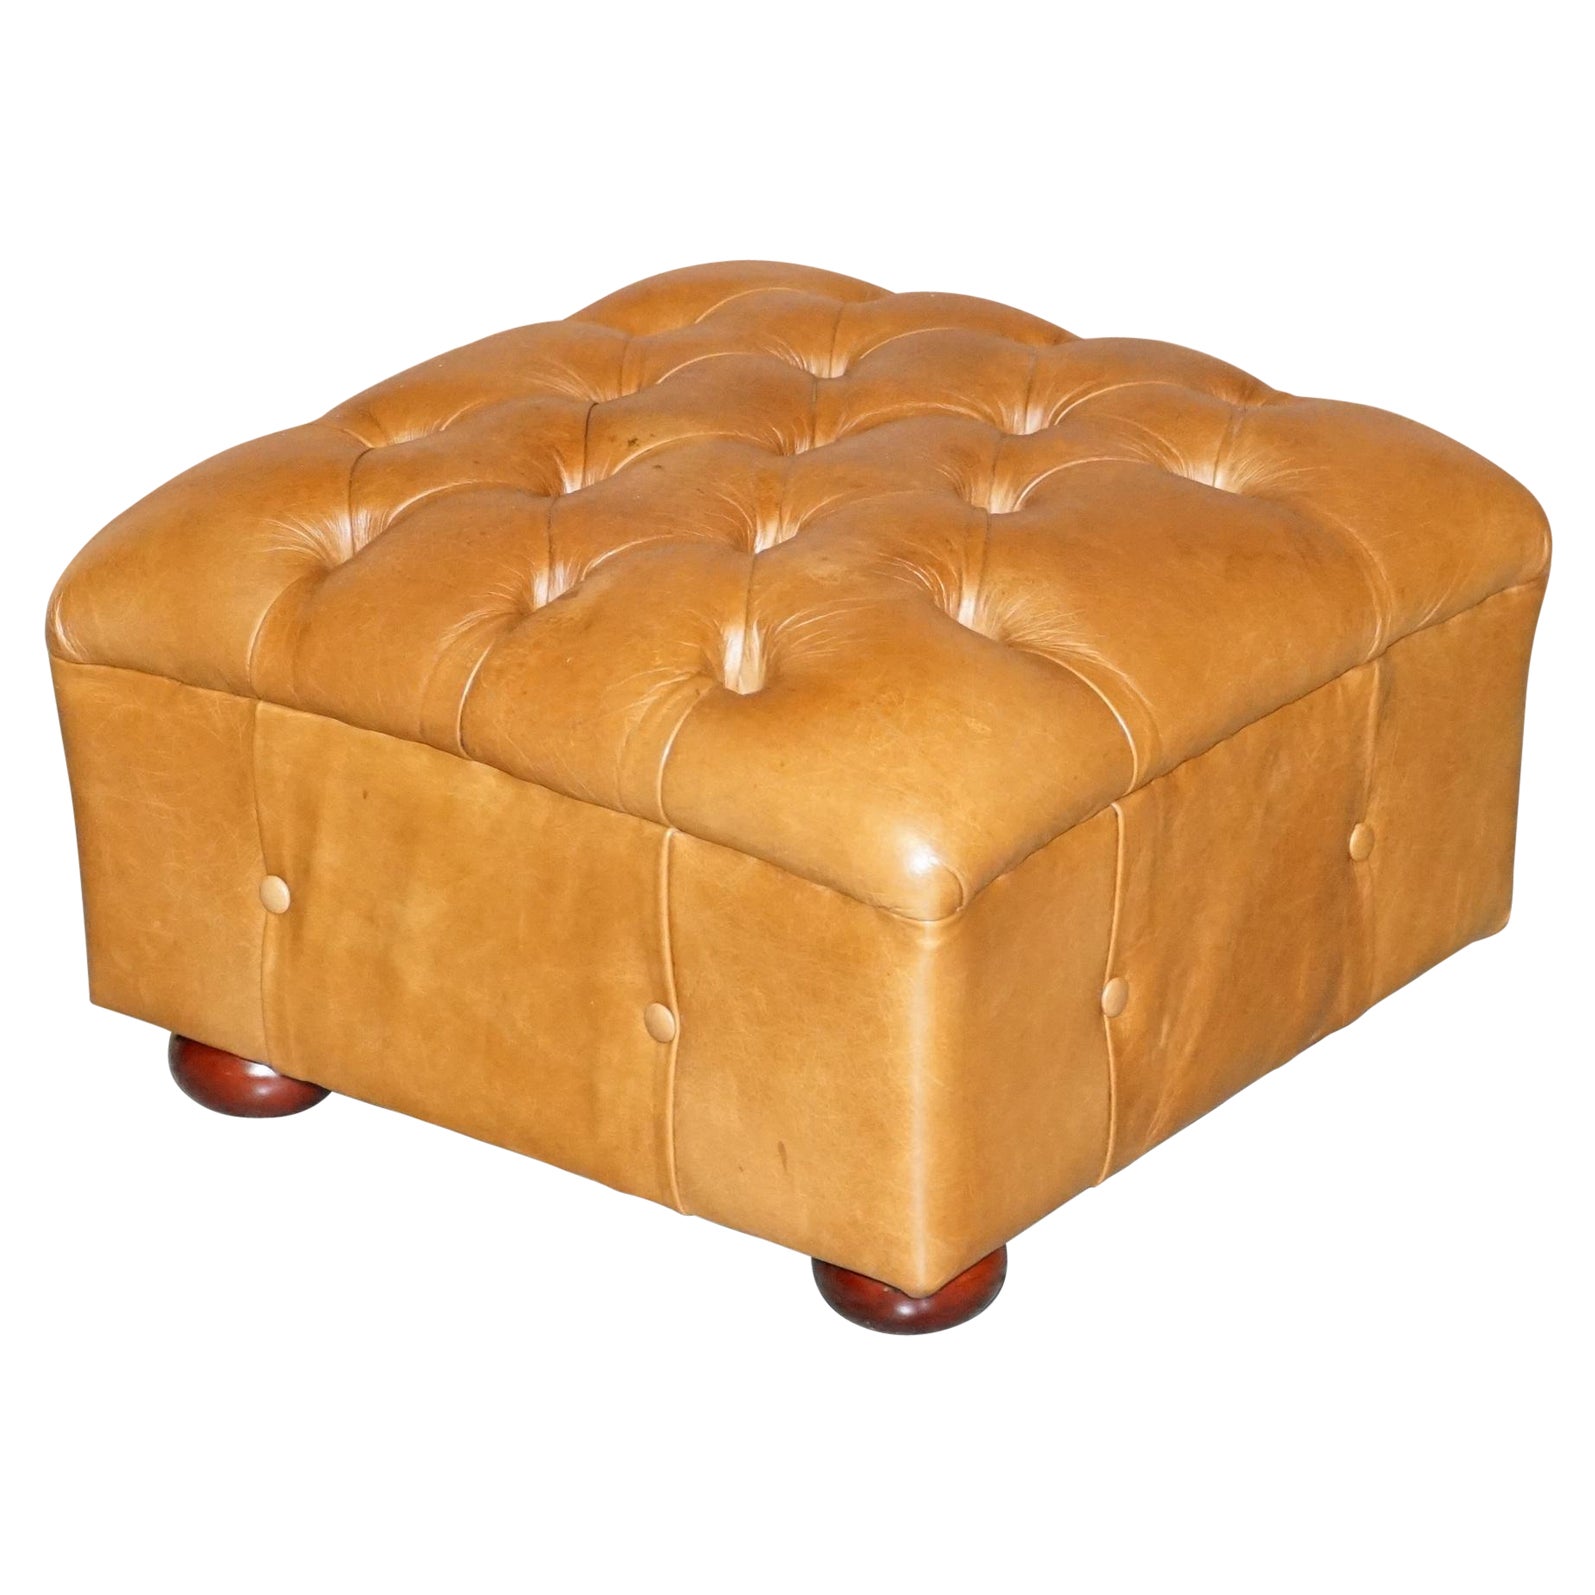 Chesterfield Brown Leather Tufted Square Footstool Vintage Biker Tan Leather